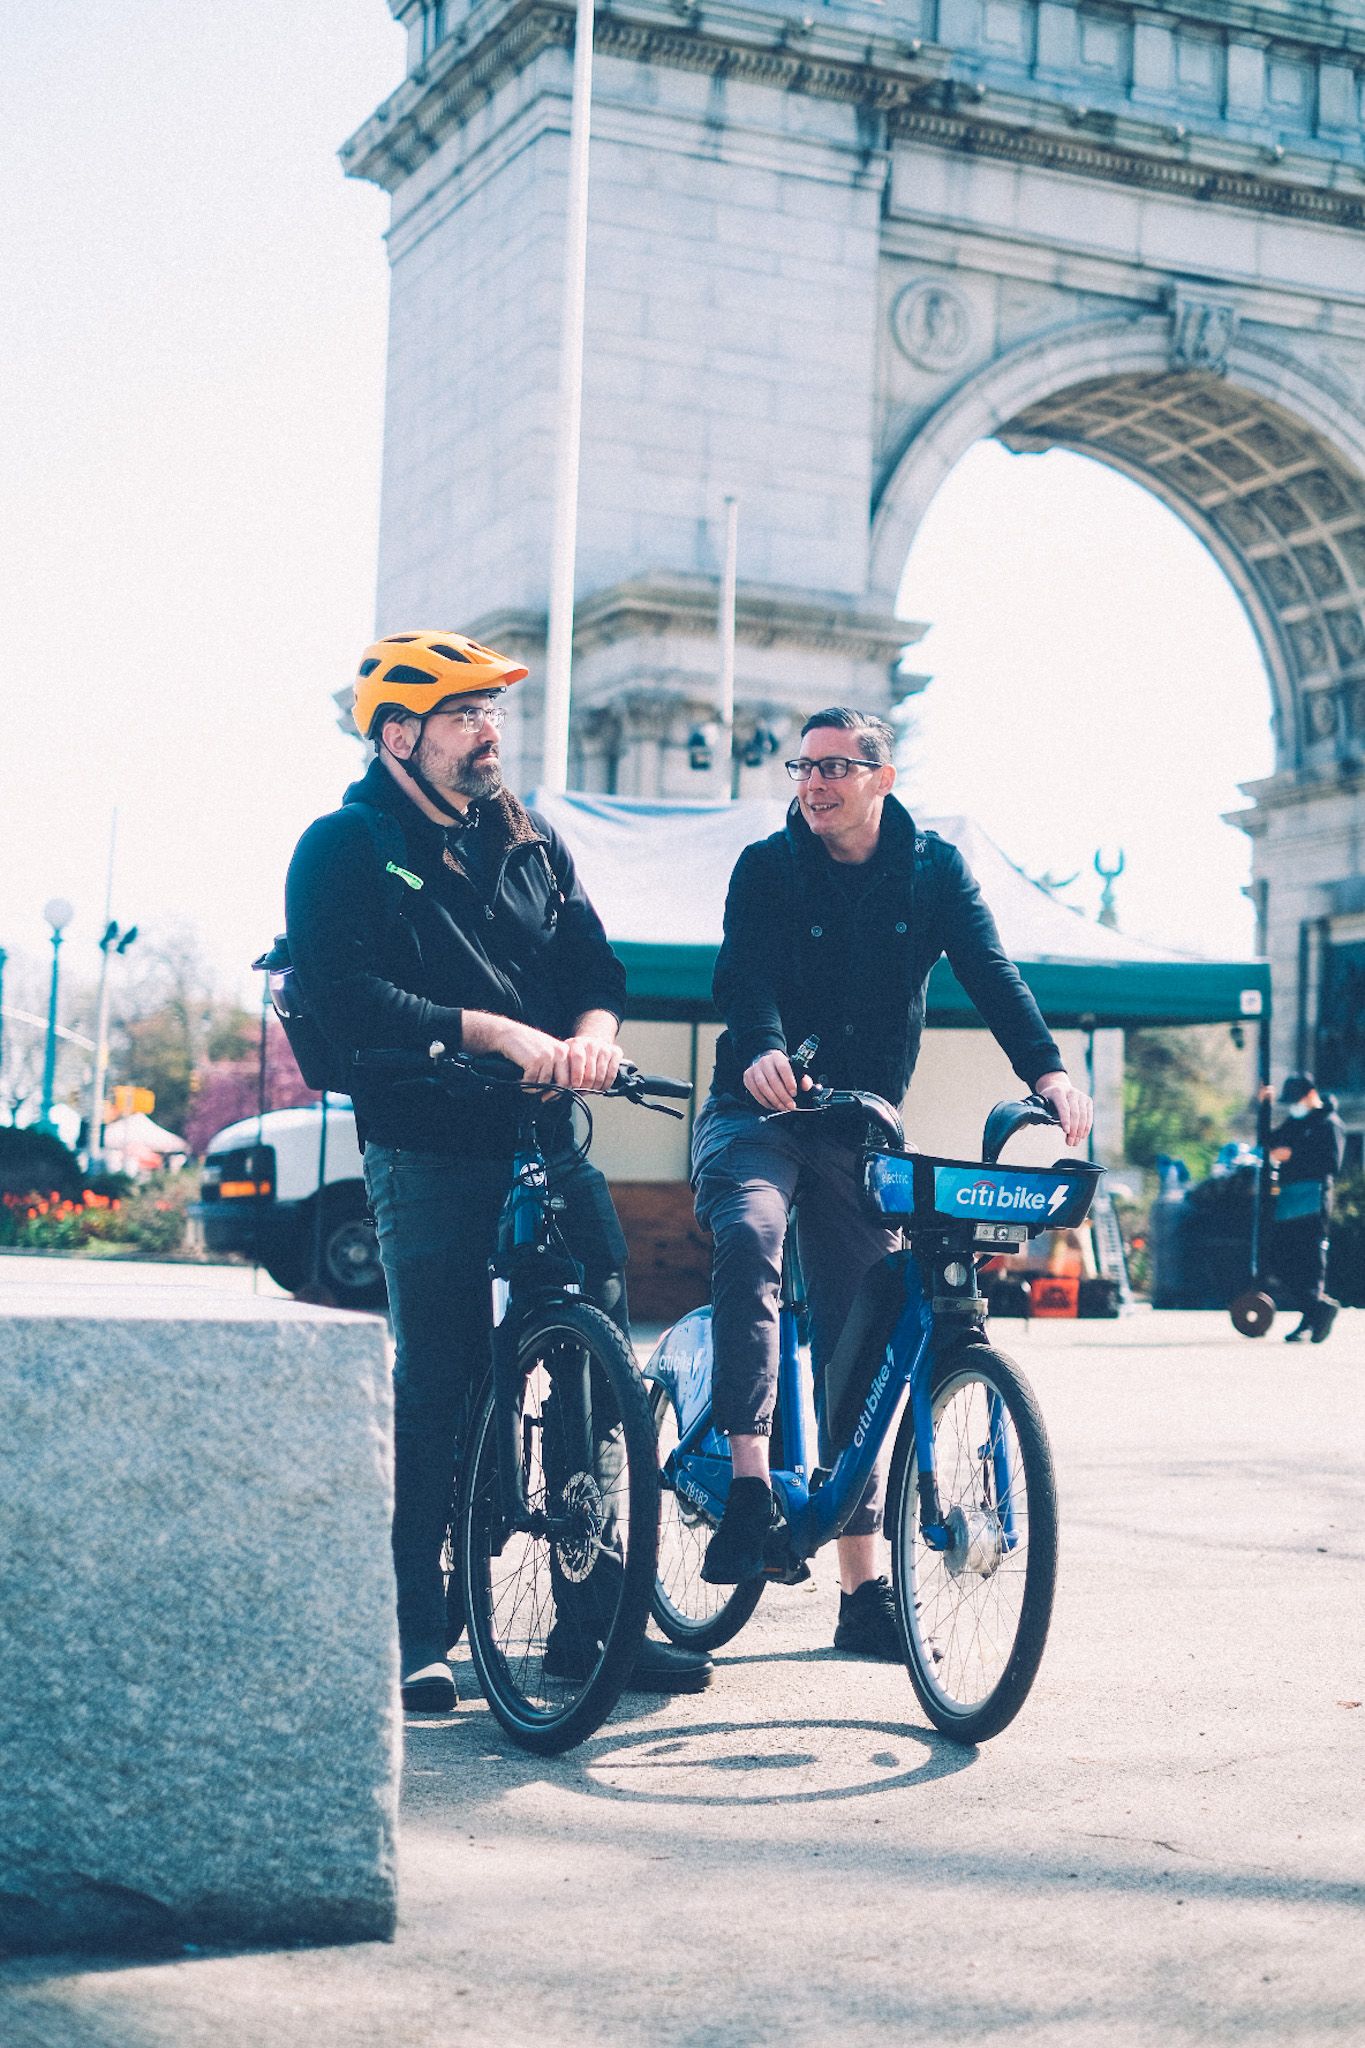 Two men are perched on their bikes in front of an archway outside of a park, talking to each other.